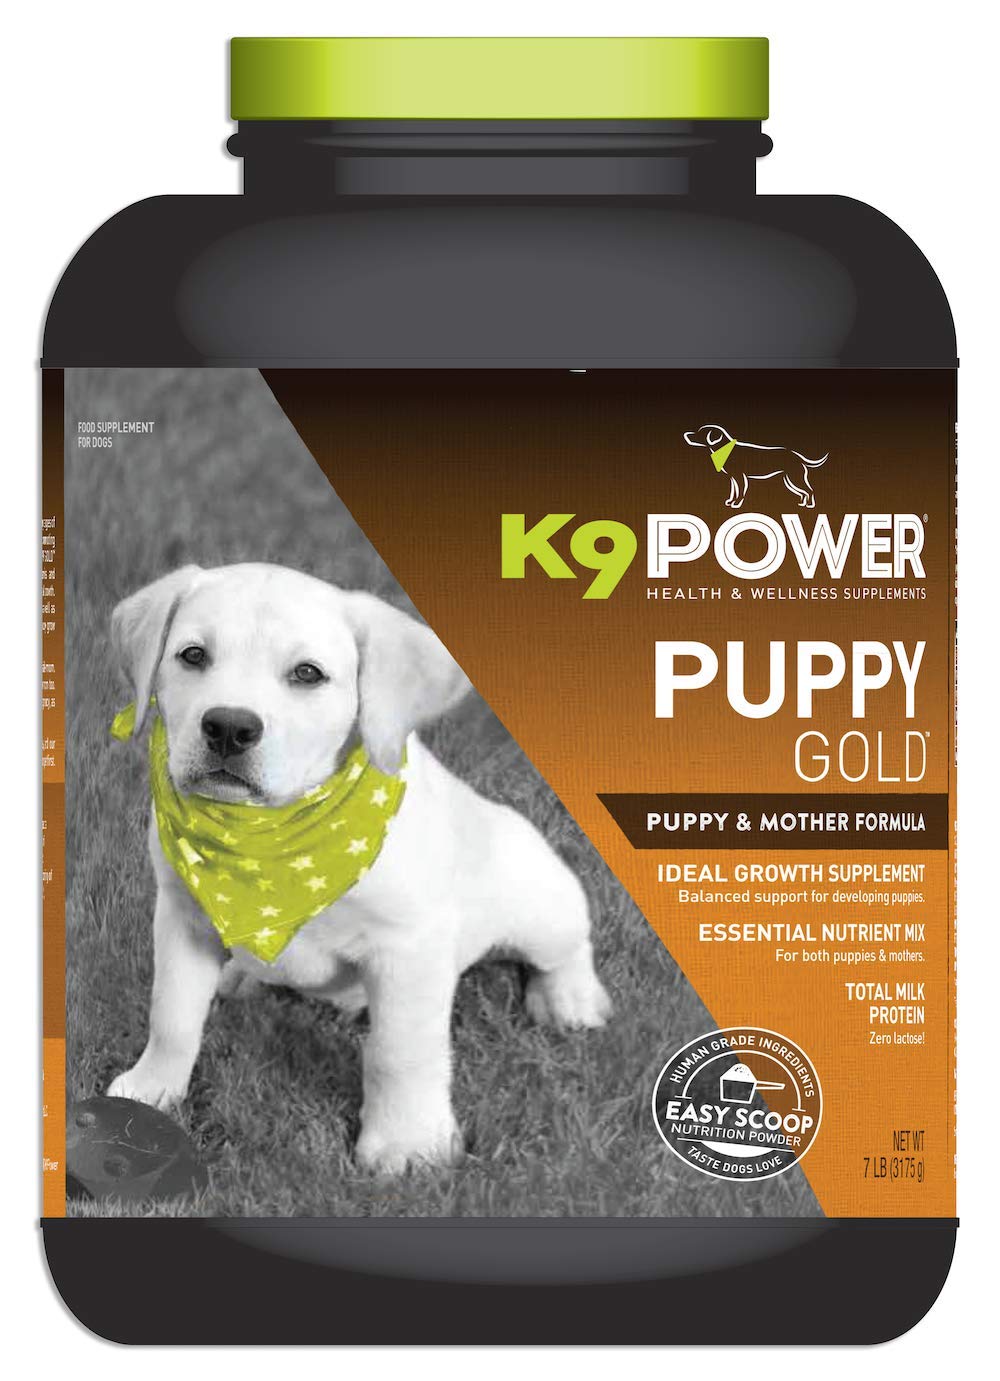 K9 Power - Puppy Gold, Nutritional Supplement for Growing Puppies & Nursing Mothers, Essential Nutrients for Healthy Development 7 Pounds